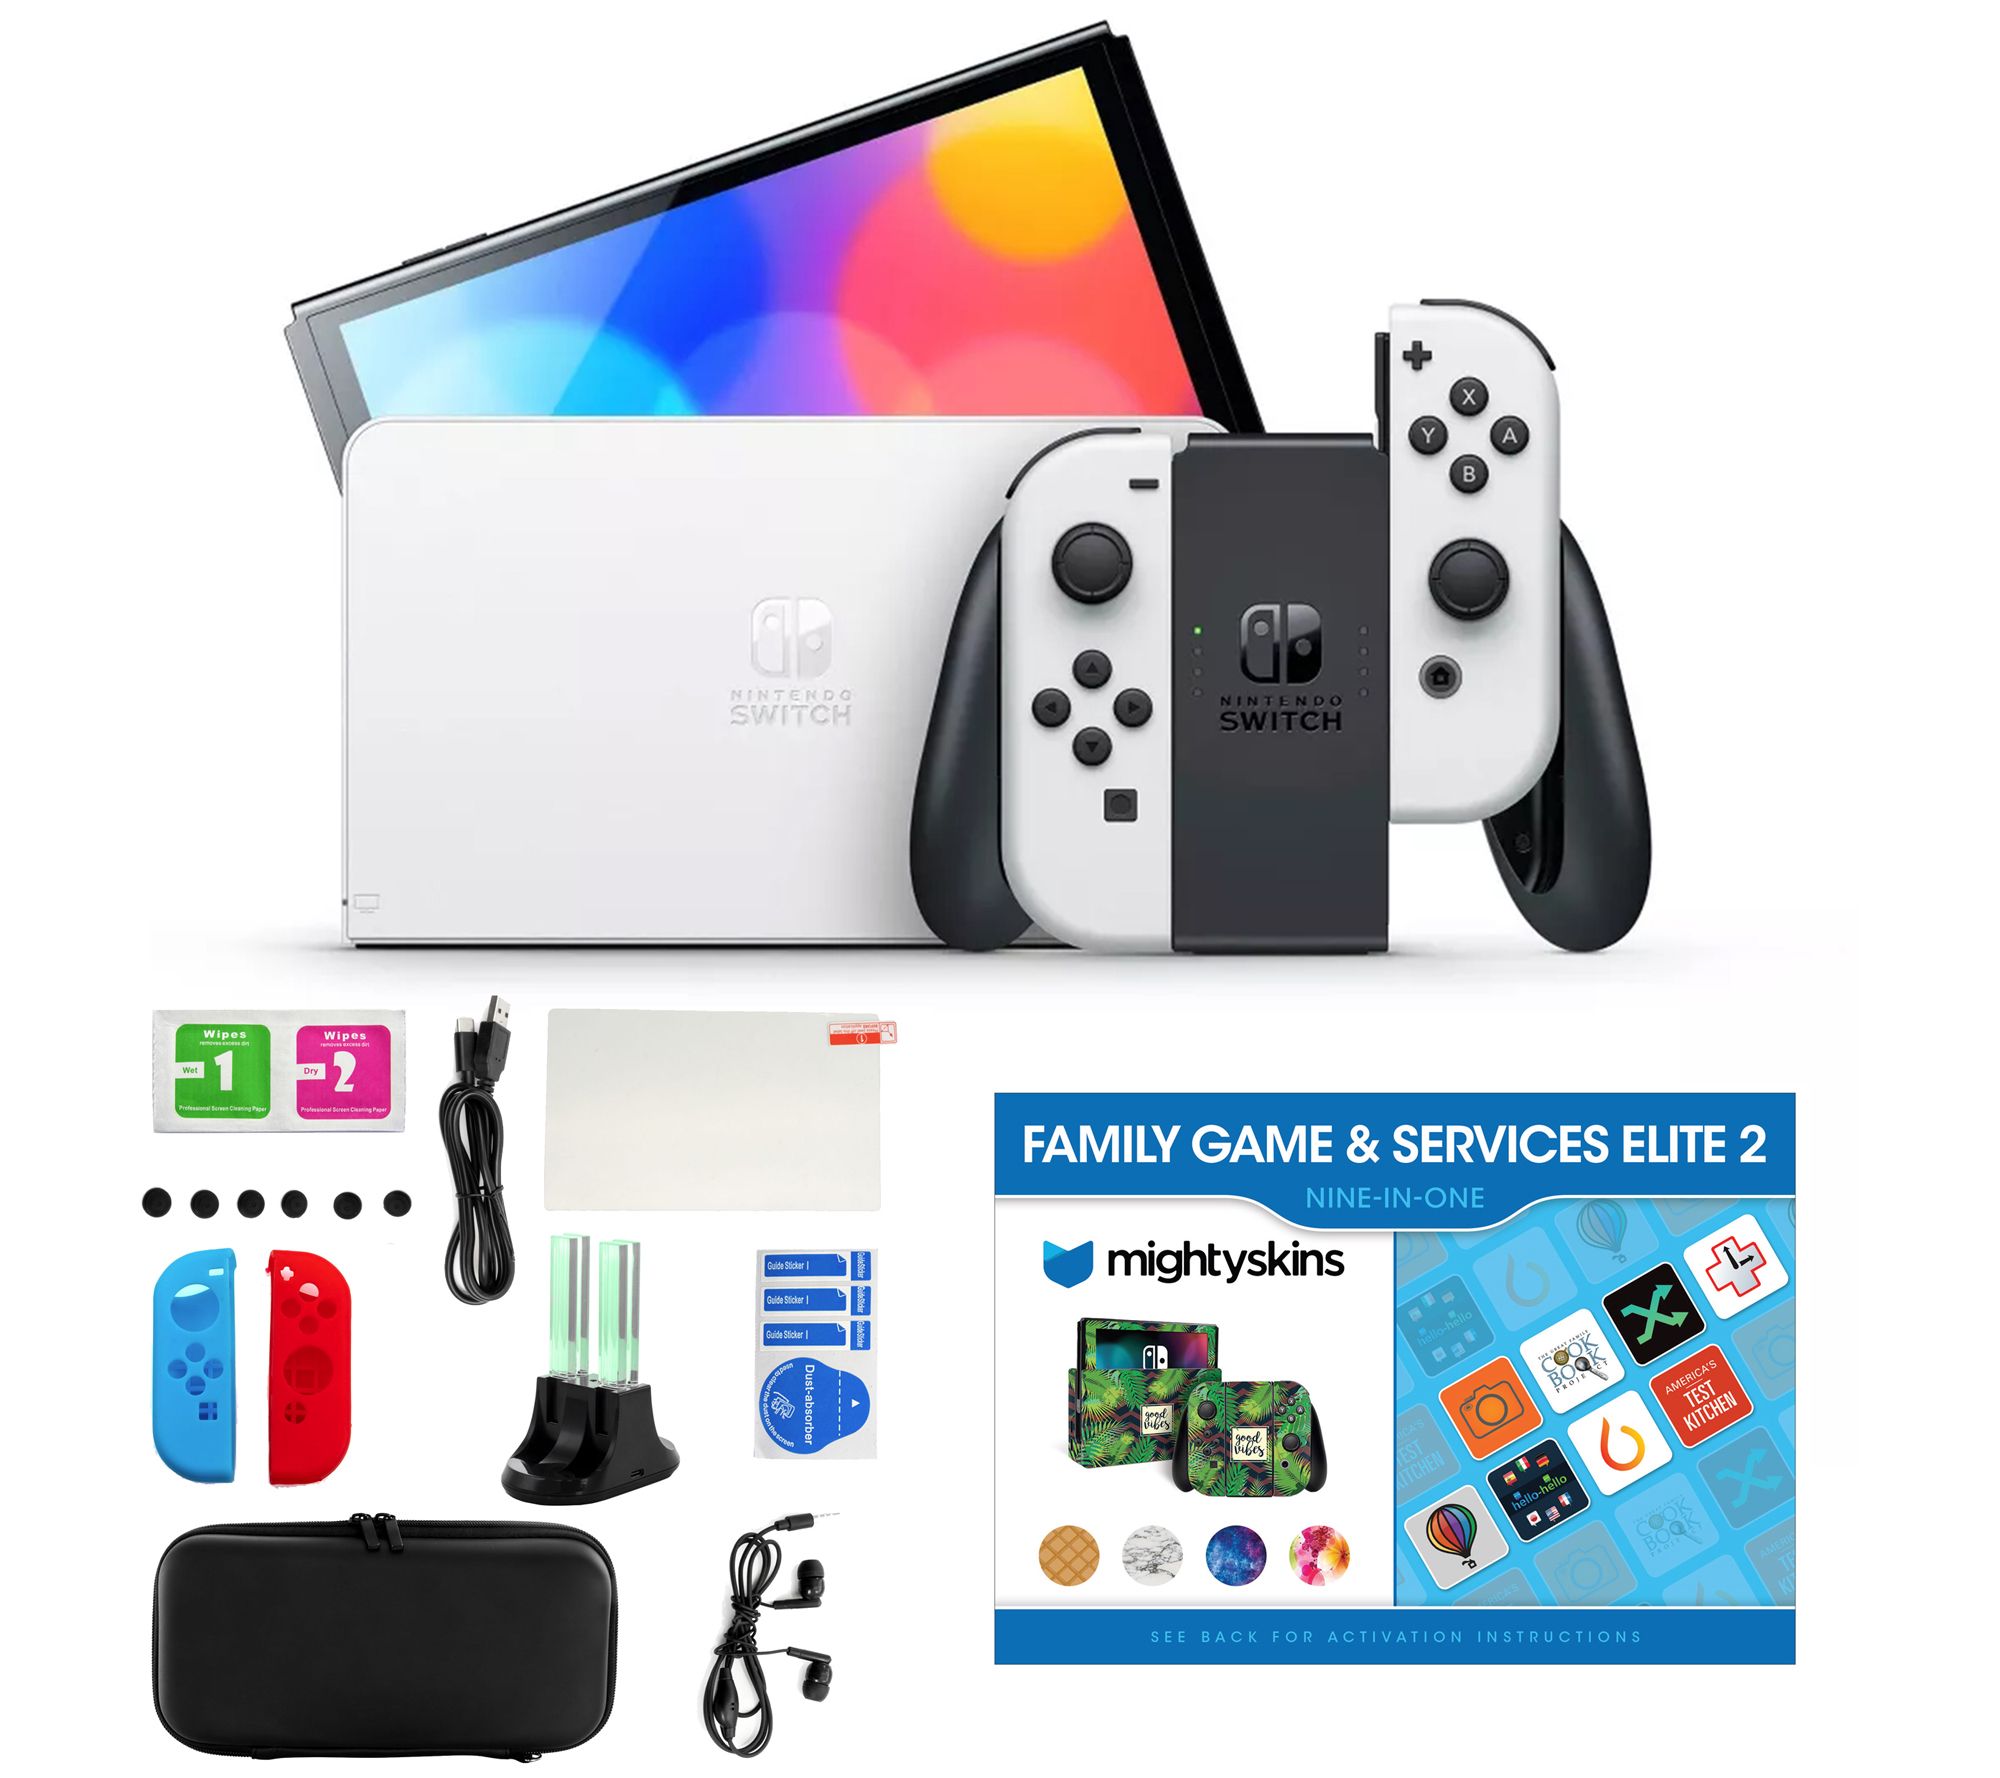 Nintendo Switch OLED Console with Accessories and Voucher - QVC.com